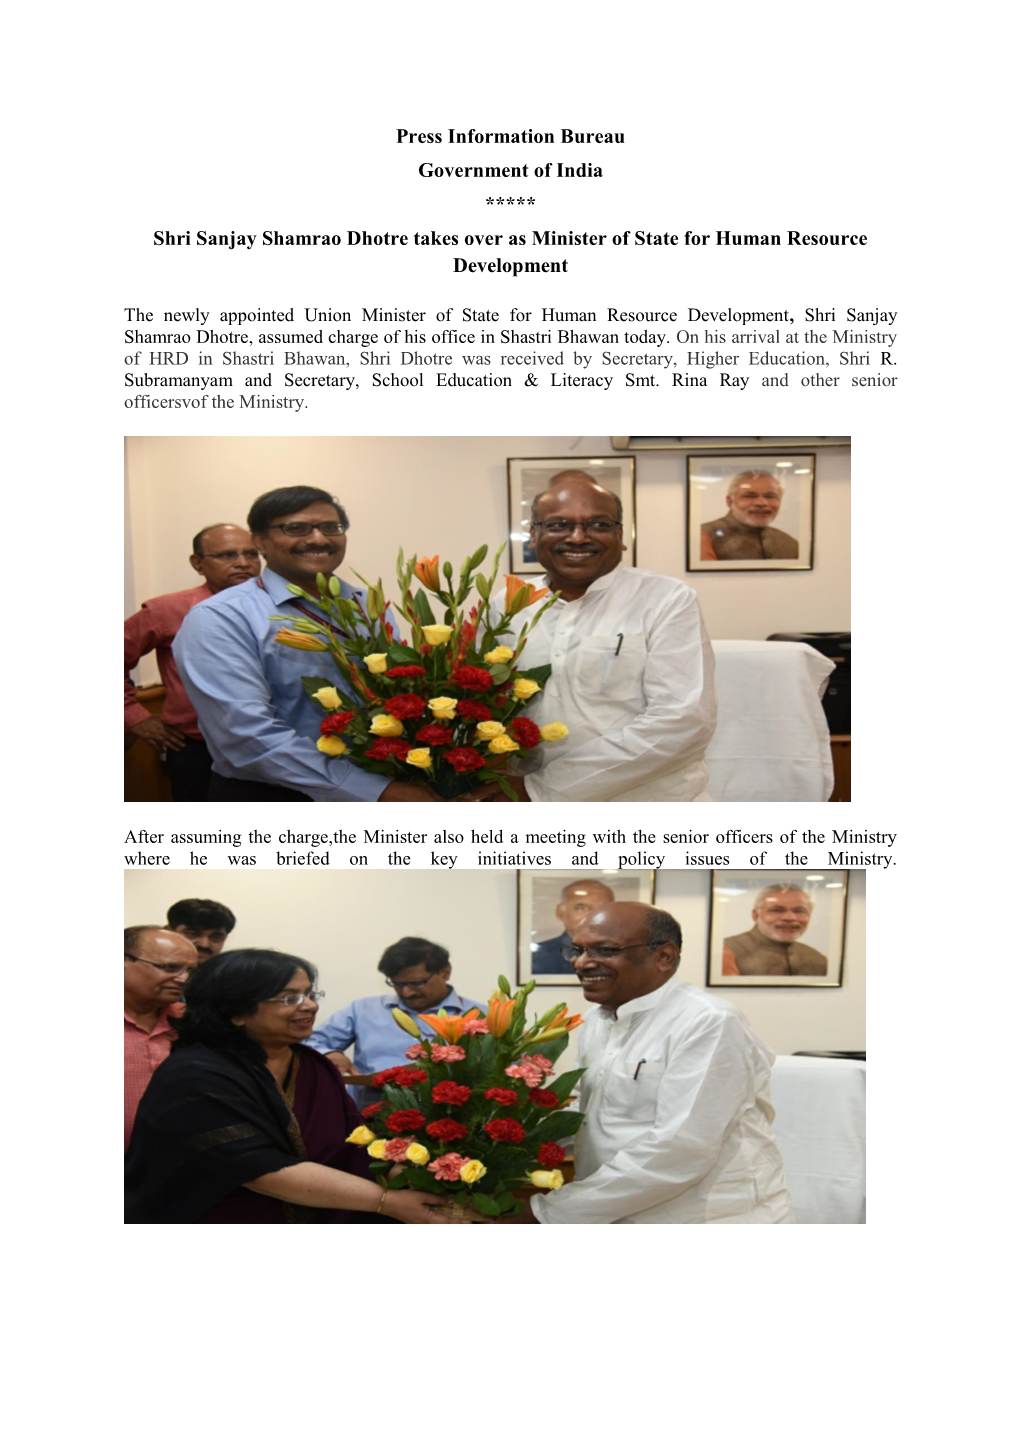 Press Information Bureau Government of India ***** Shri Sanjay Shamrao Dhotre Takes Over As Minister of State for Human Resource Development